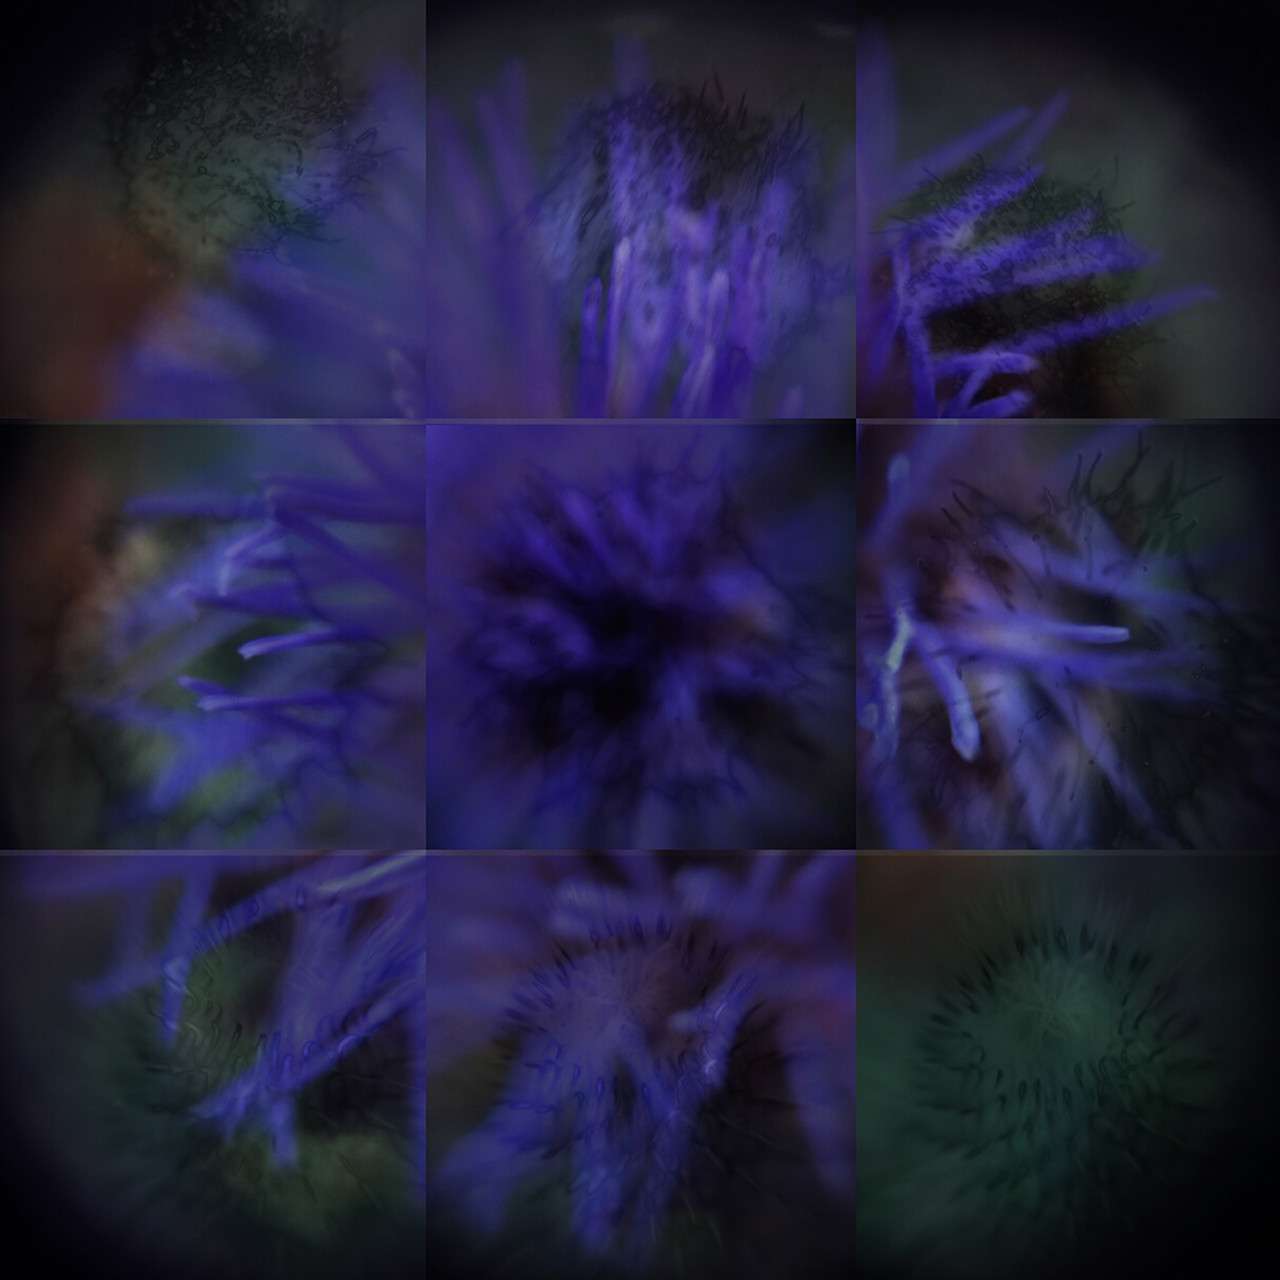 Dye sublimation print on aluminum by Tama Hochbaum, grid images of pthalo green thistles and ultramarine cardoon